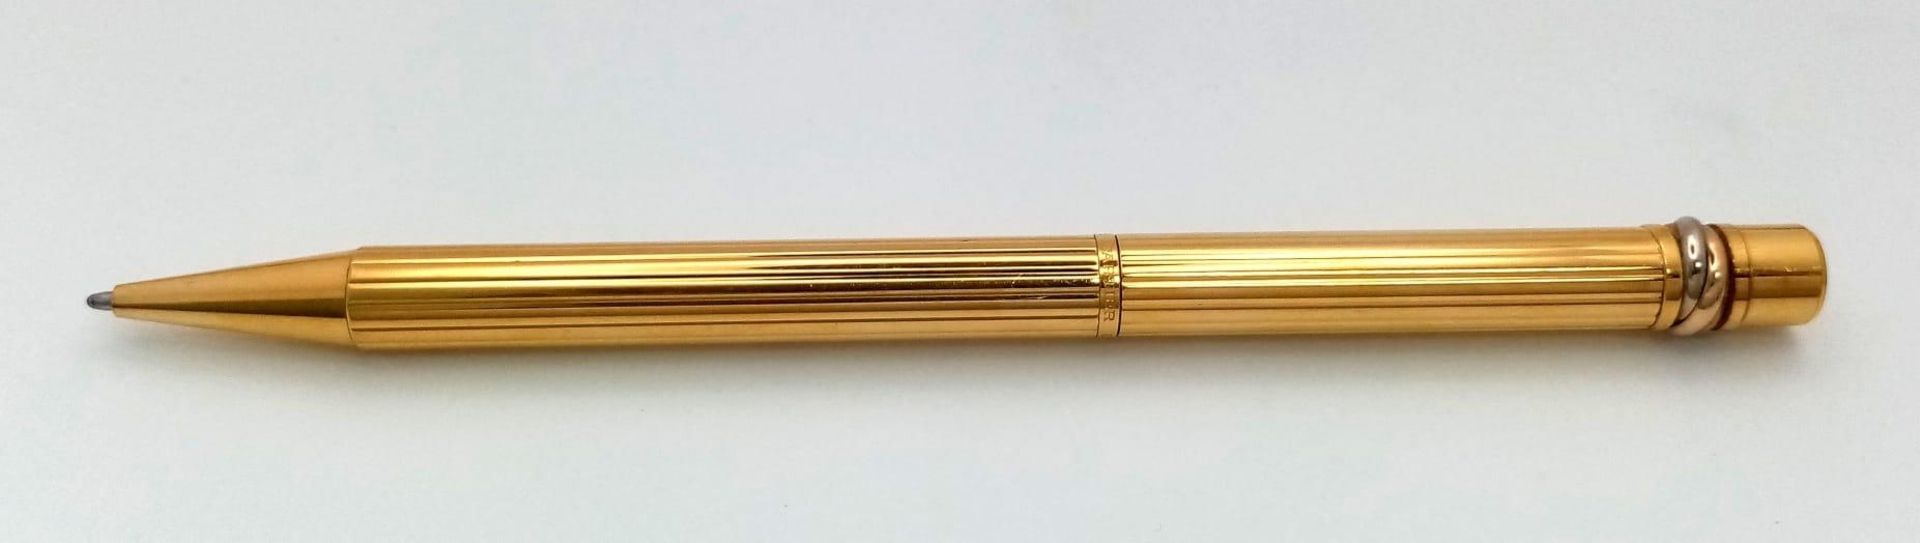 A Cartier Santos Gold Plated Ballpoint Pen. In good condition and working order. Ref: 14893 - Image 3 of 6